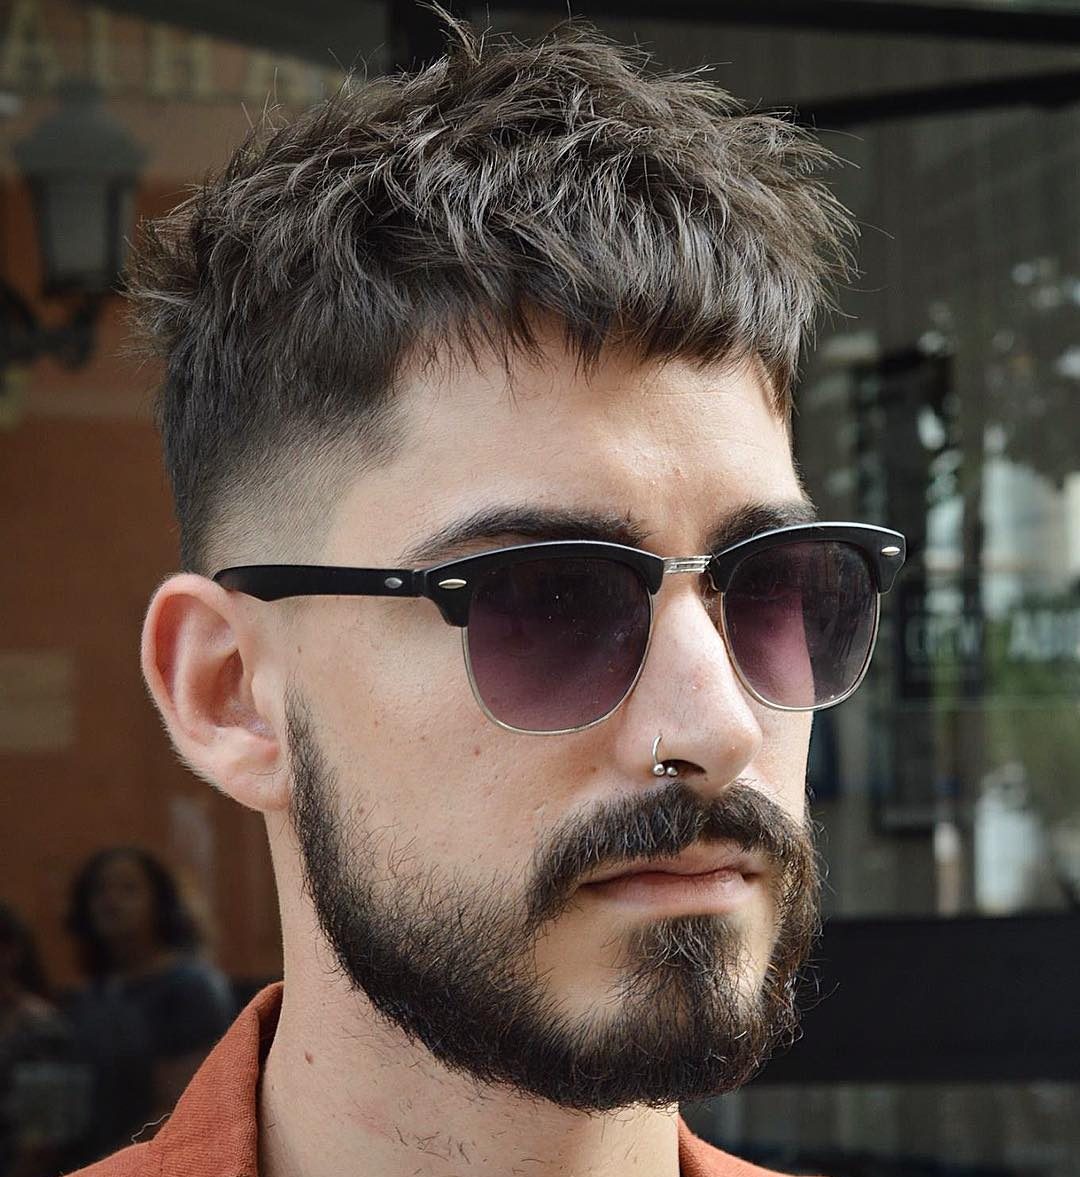 Latest Hairstyles For Men 30 New Hair Looks To Copy In 2020